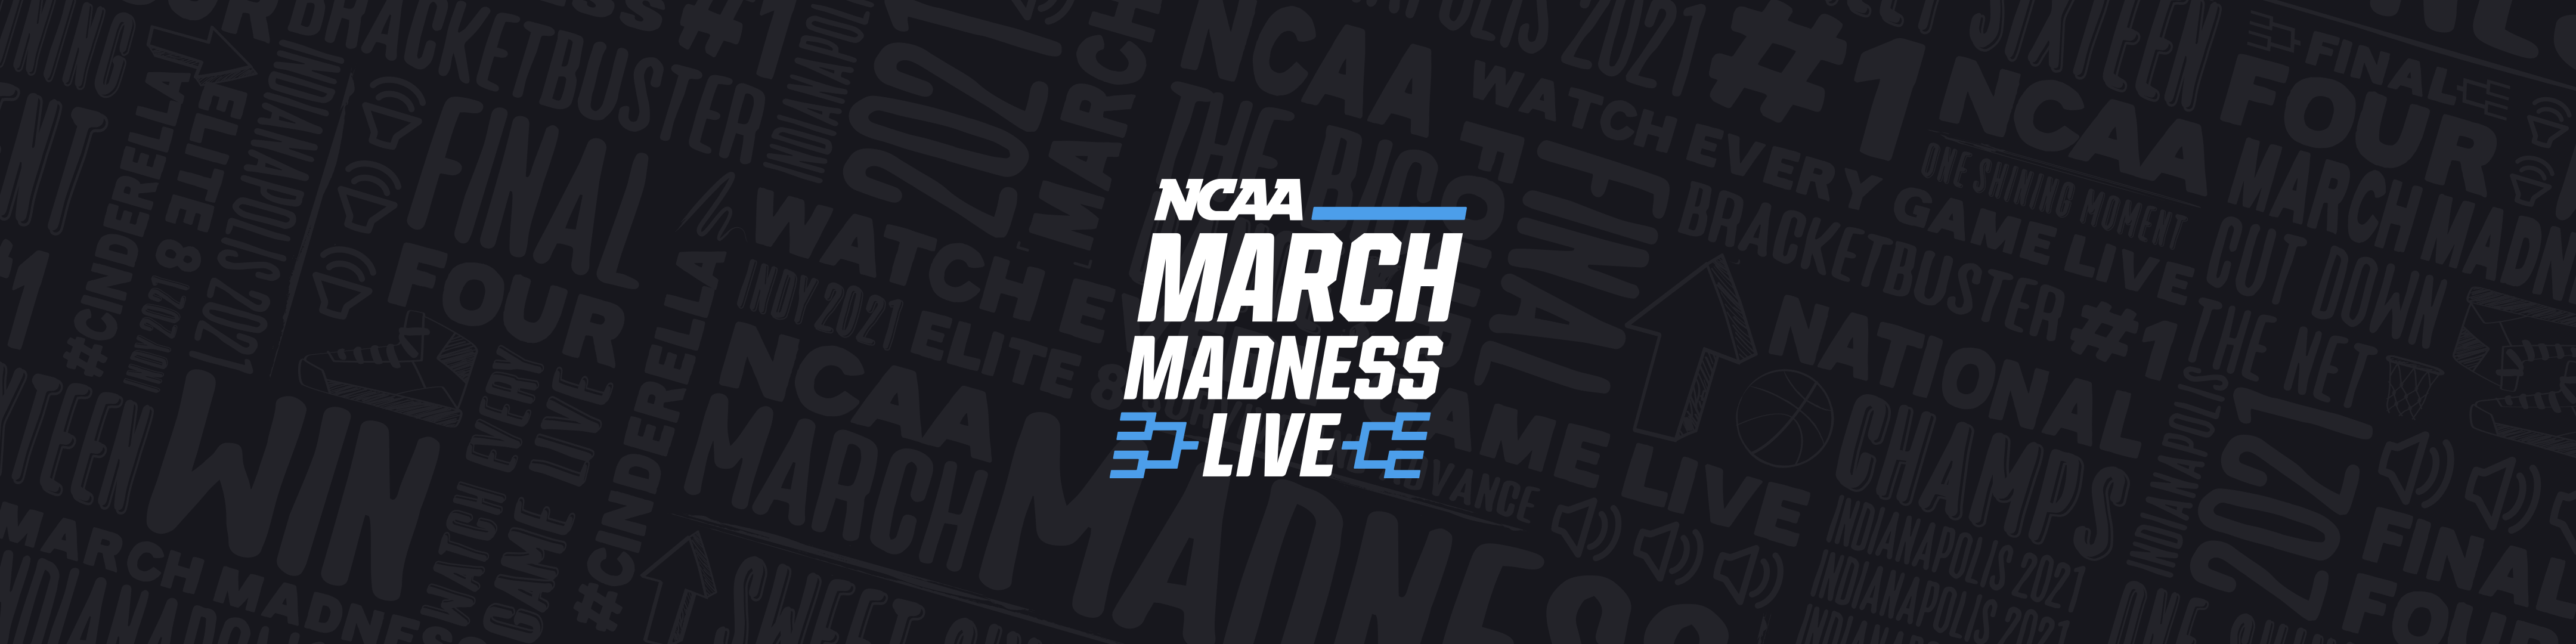 Ncaa March Madness Live Overview Apple App Store Us